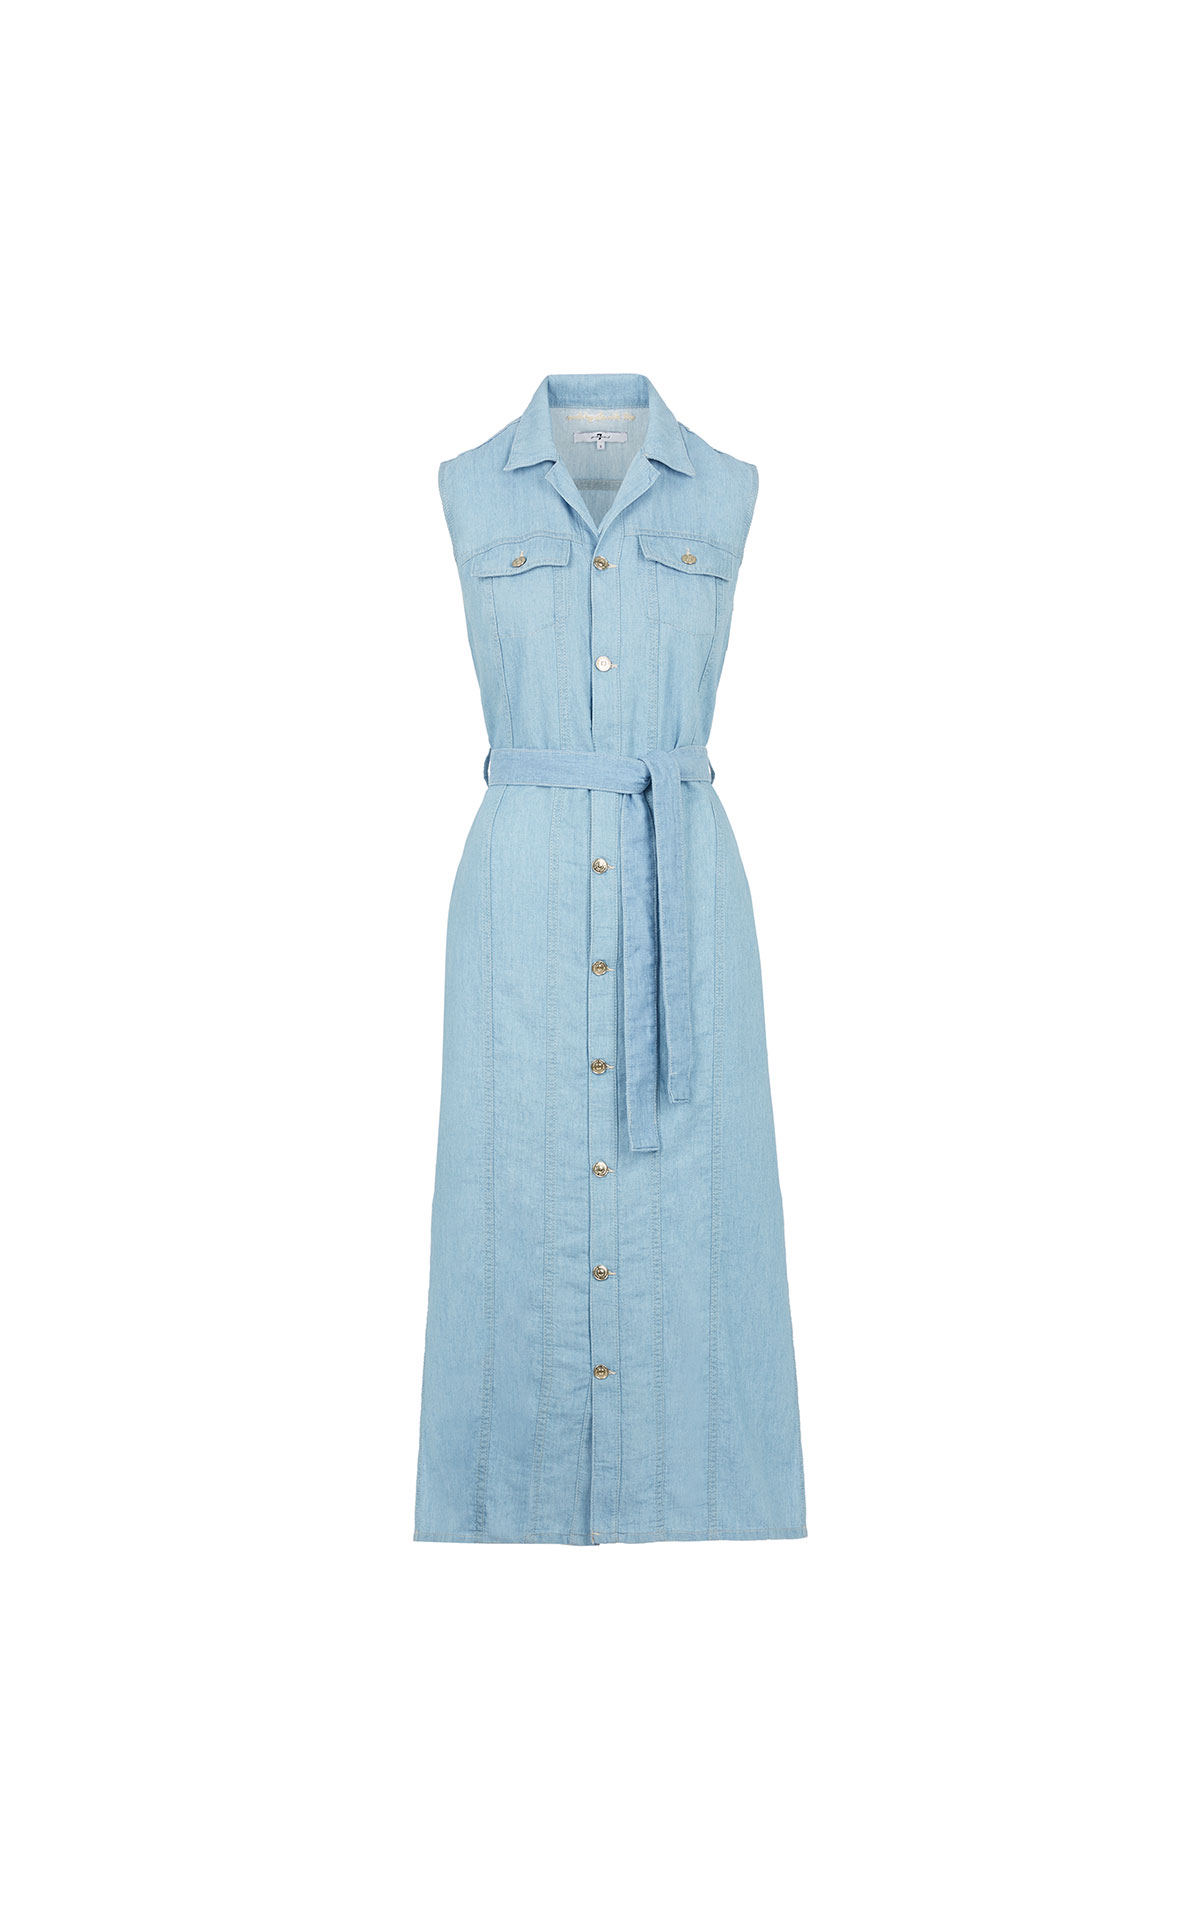 7 For all Mankind Lori dress Angelino from Bicester Village